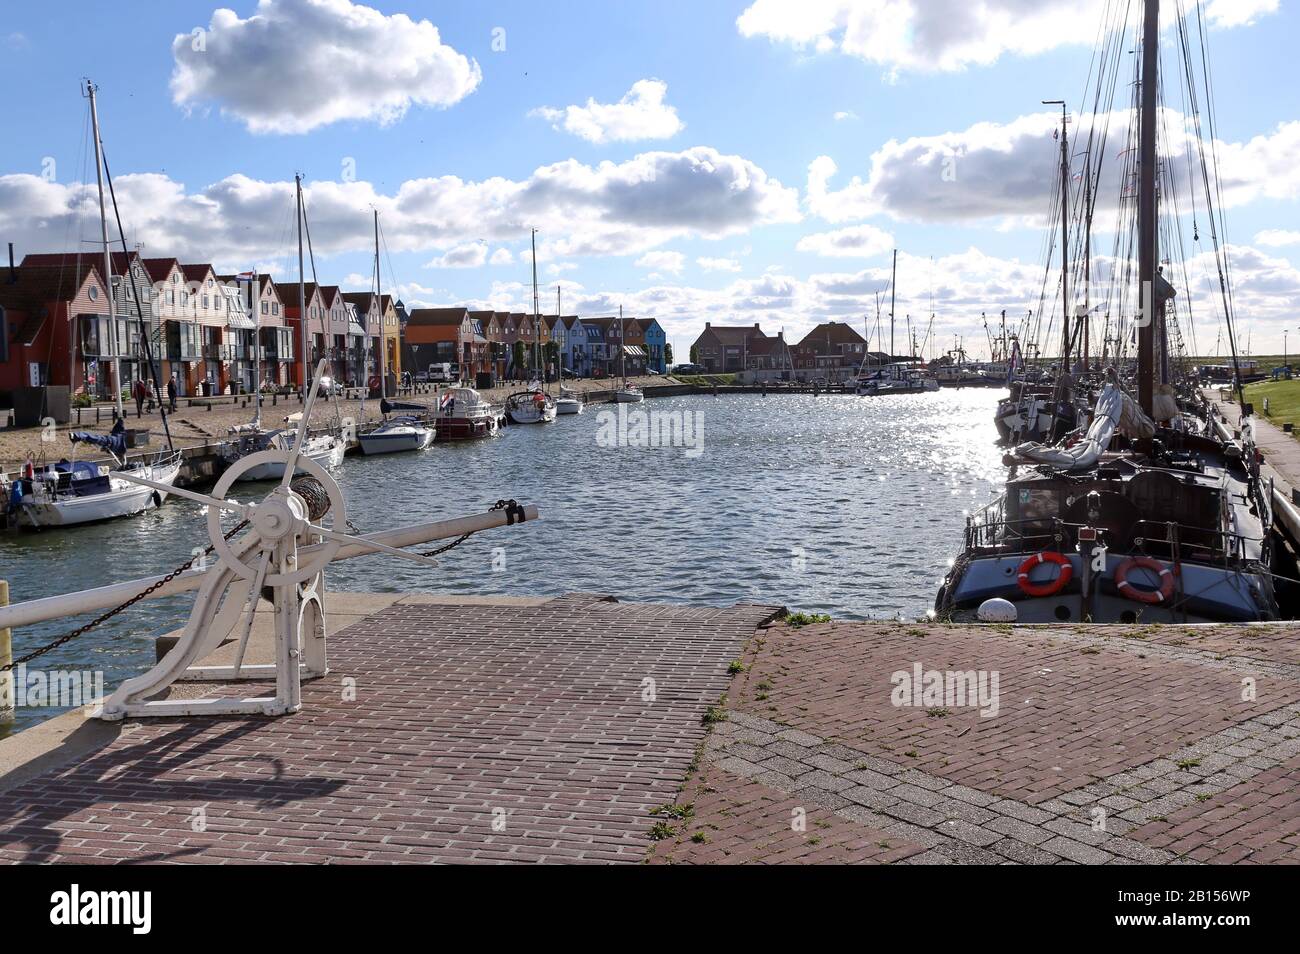 The small port of Savoren in the Netherlands Stock Photo